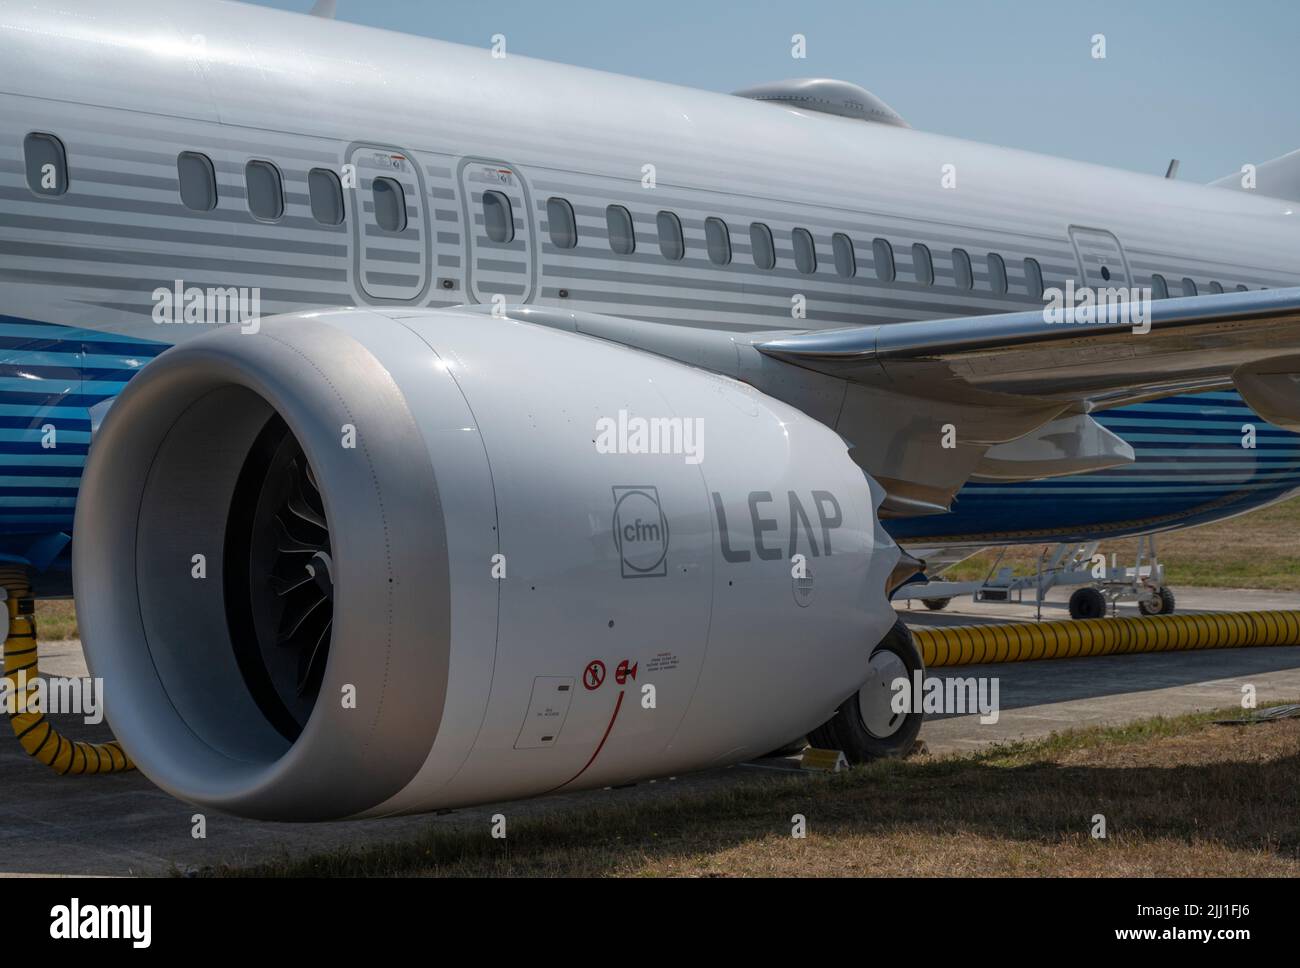 Farnborough International Airshow, 18 July 2022, Hampshire, England, UK. LEAP-1B turbofan engine pod of the new Boeing 737 MAX 10 at the Trade Airshow. Stock Photo